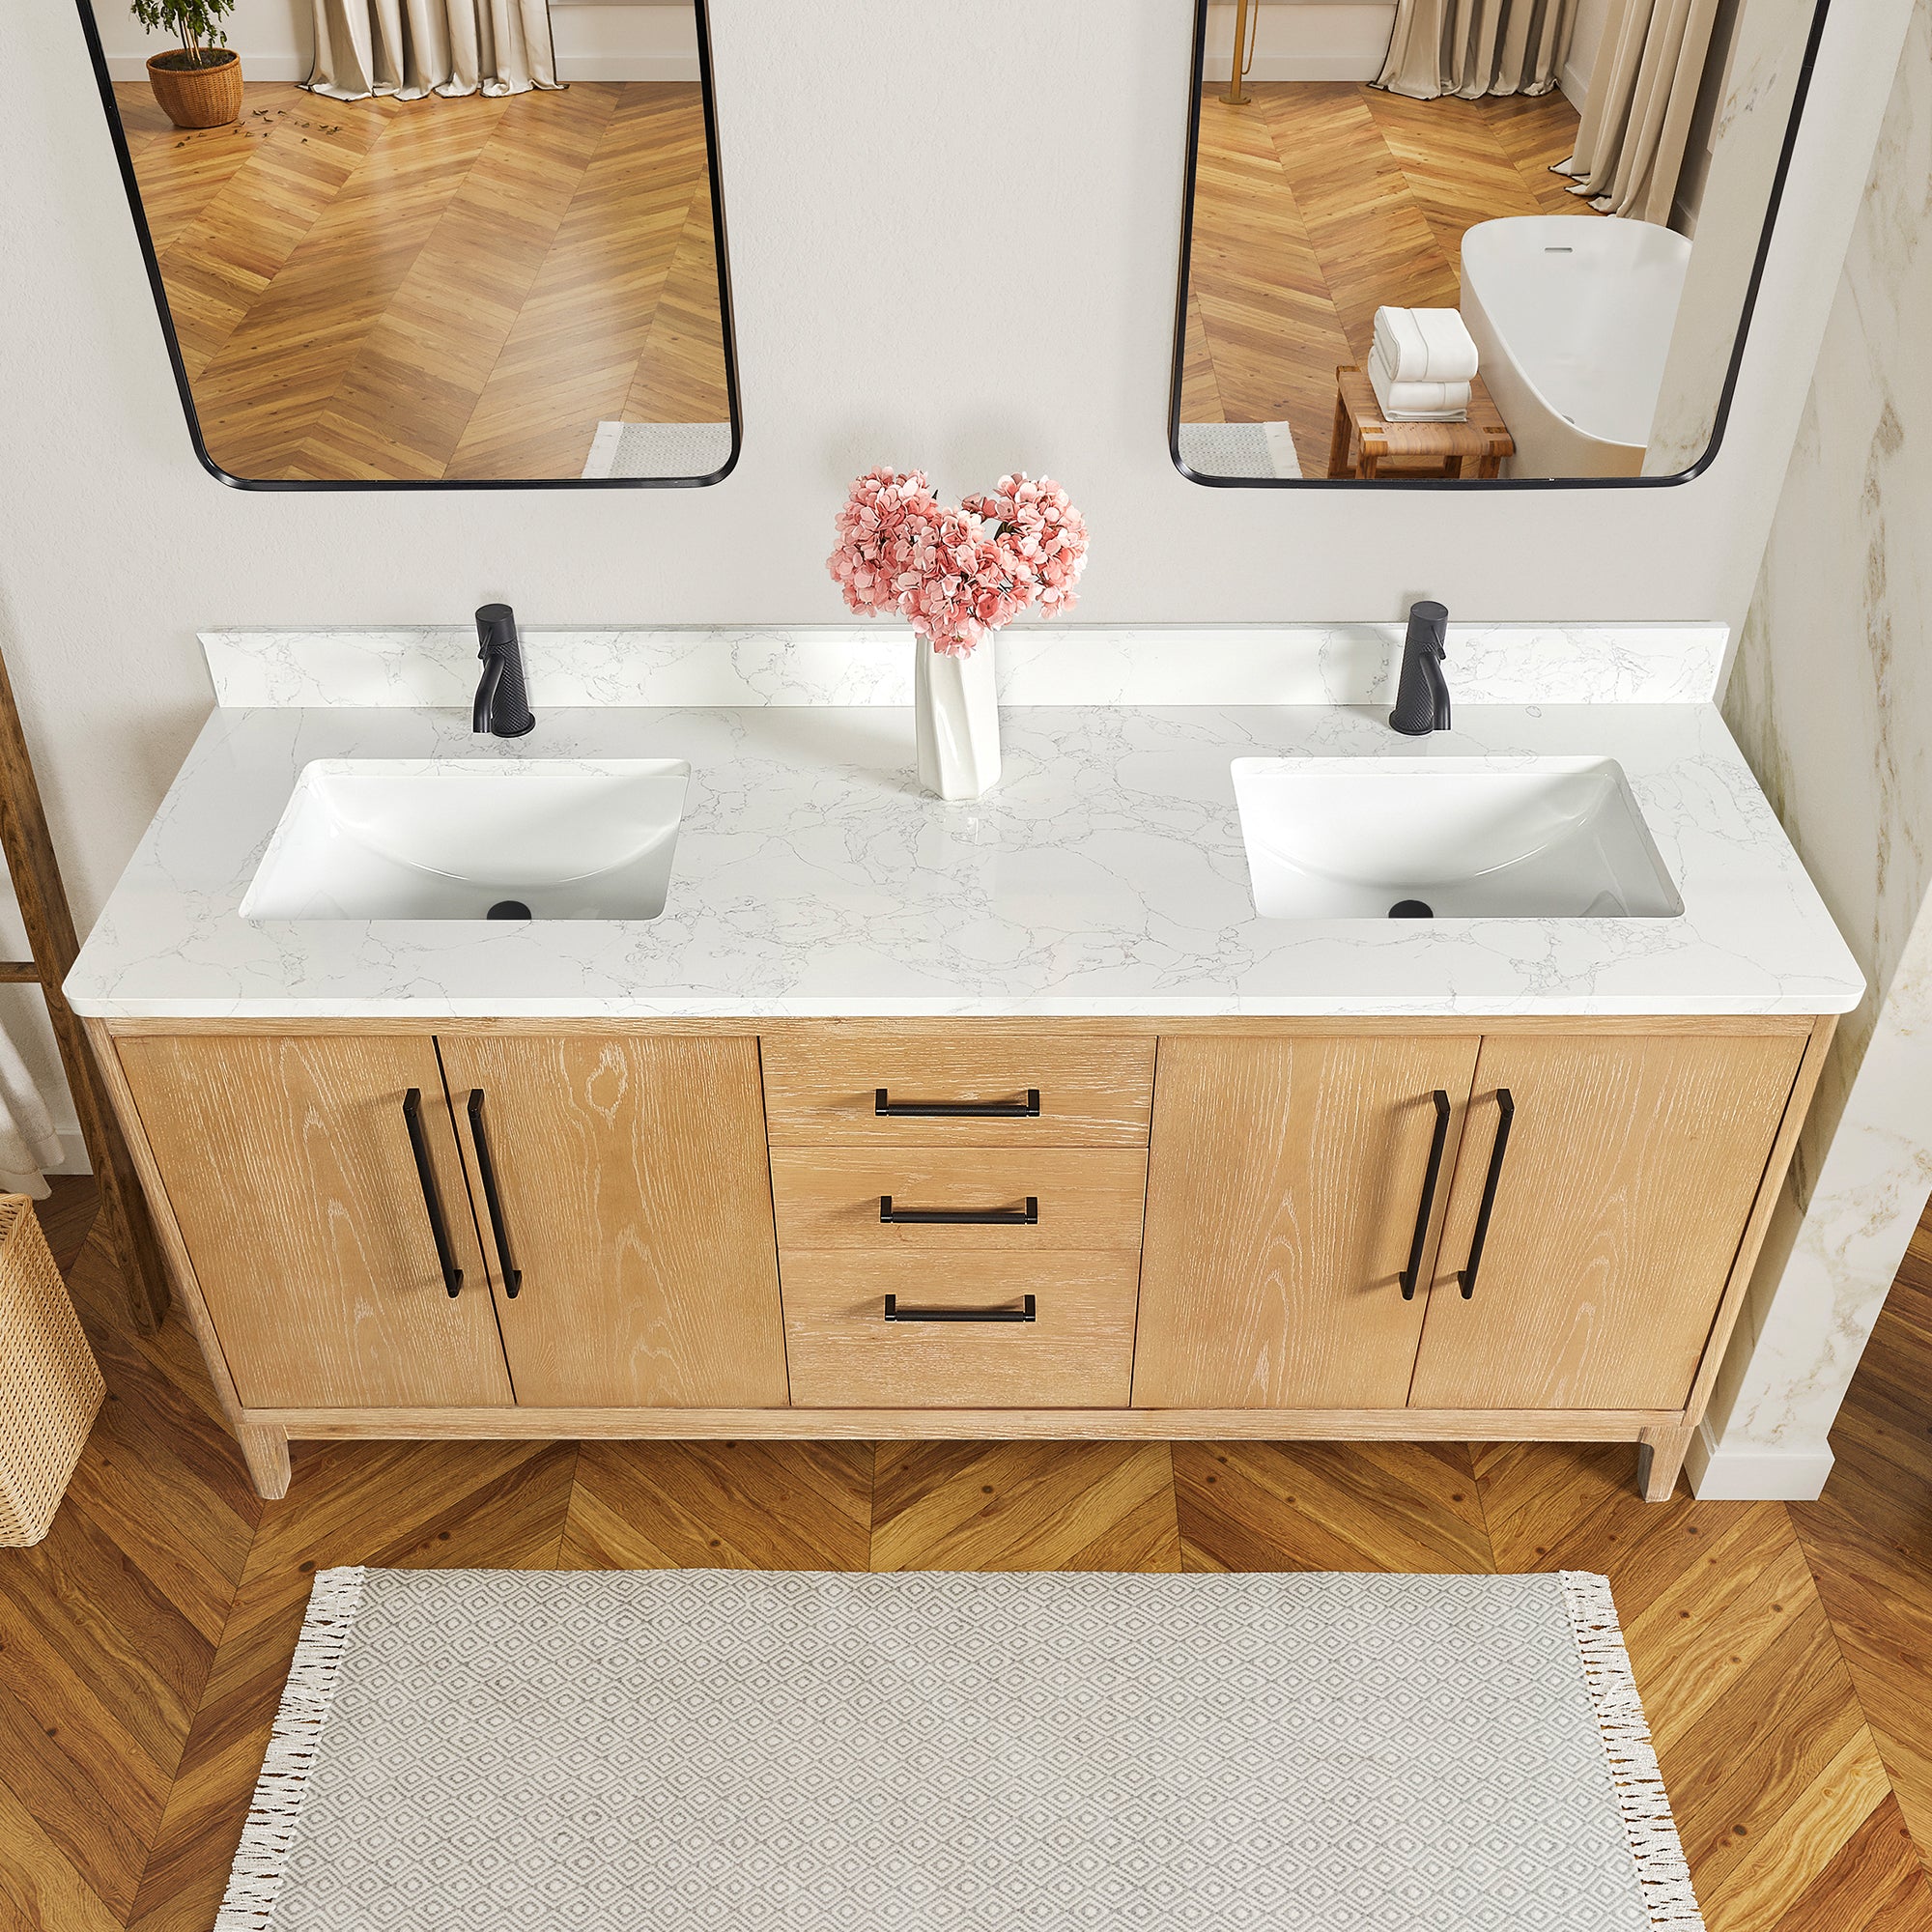 Gara 72" Free-standing Double Bath Vanity in Washed Ash Grey with White Grain Composite Stone Top